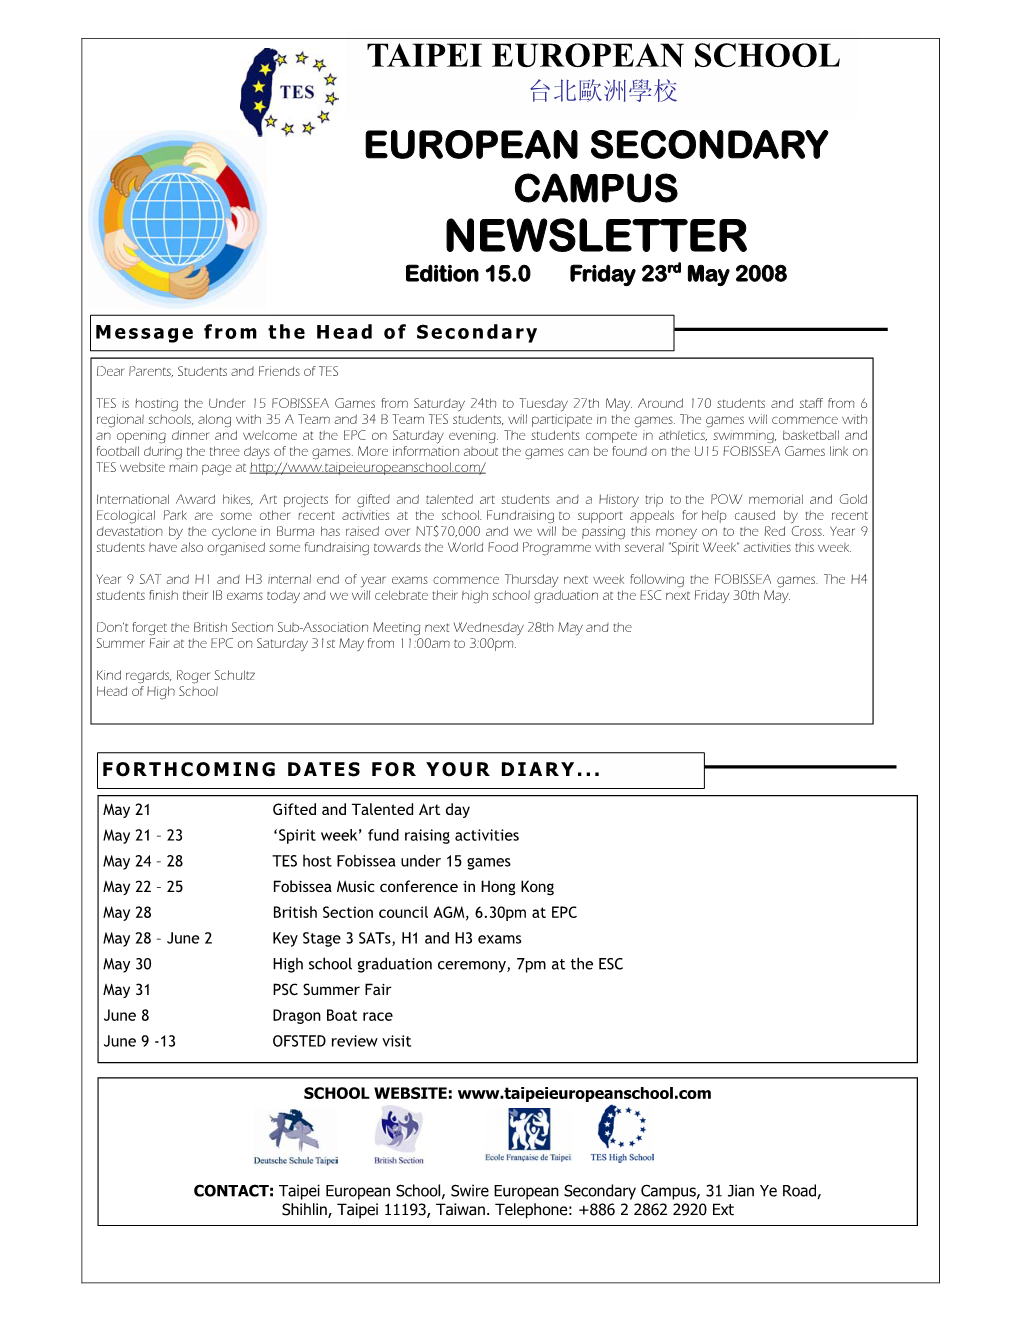 NEWSLETTER Rd Edition 15.0 Friday 23 May 2008